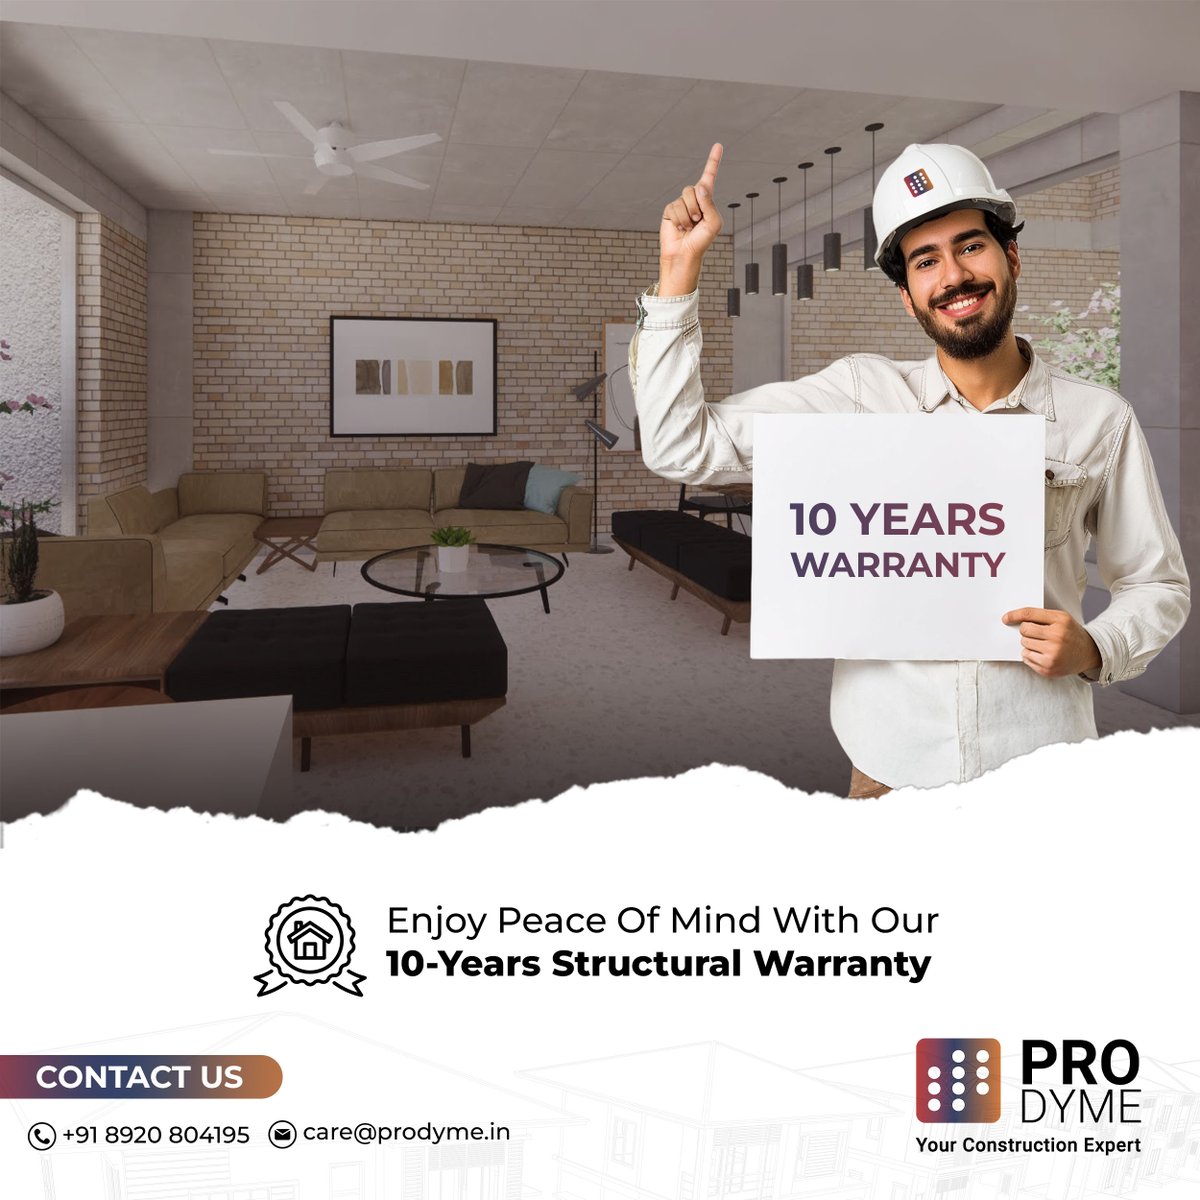 Our 10-year structural warranty provides peace of mind. It's backed by rigorous quality standards throughout construction. 

Contact us now!

91-8920804195
care@prodyme.in
.
.
#HomeConstruction #HomeRenovation #HomeBuilders #DreamHome #Construction #Renovation #ProdymeHomes